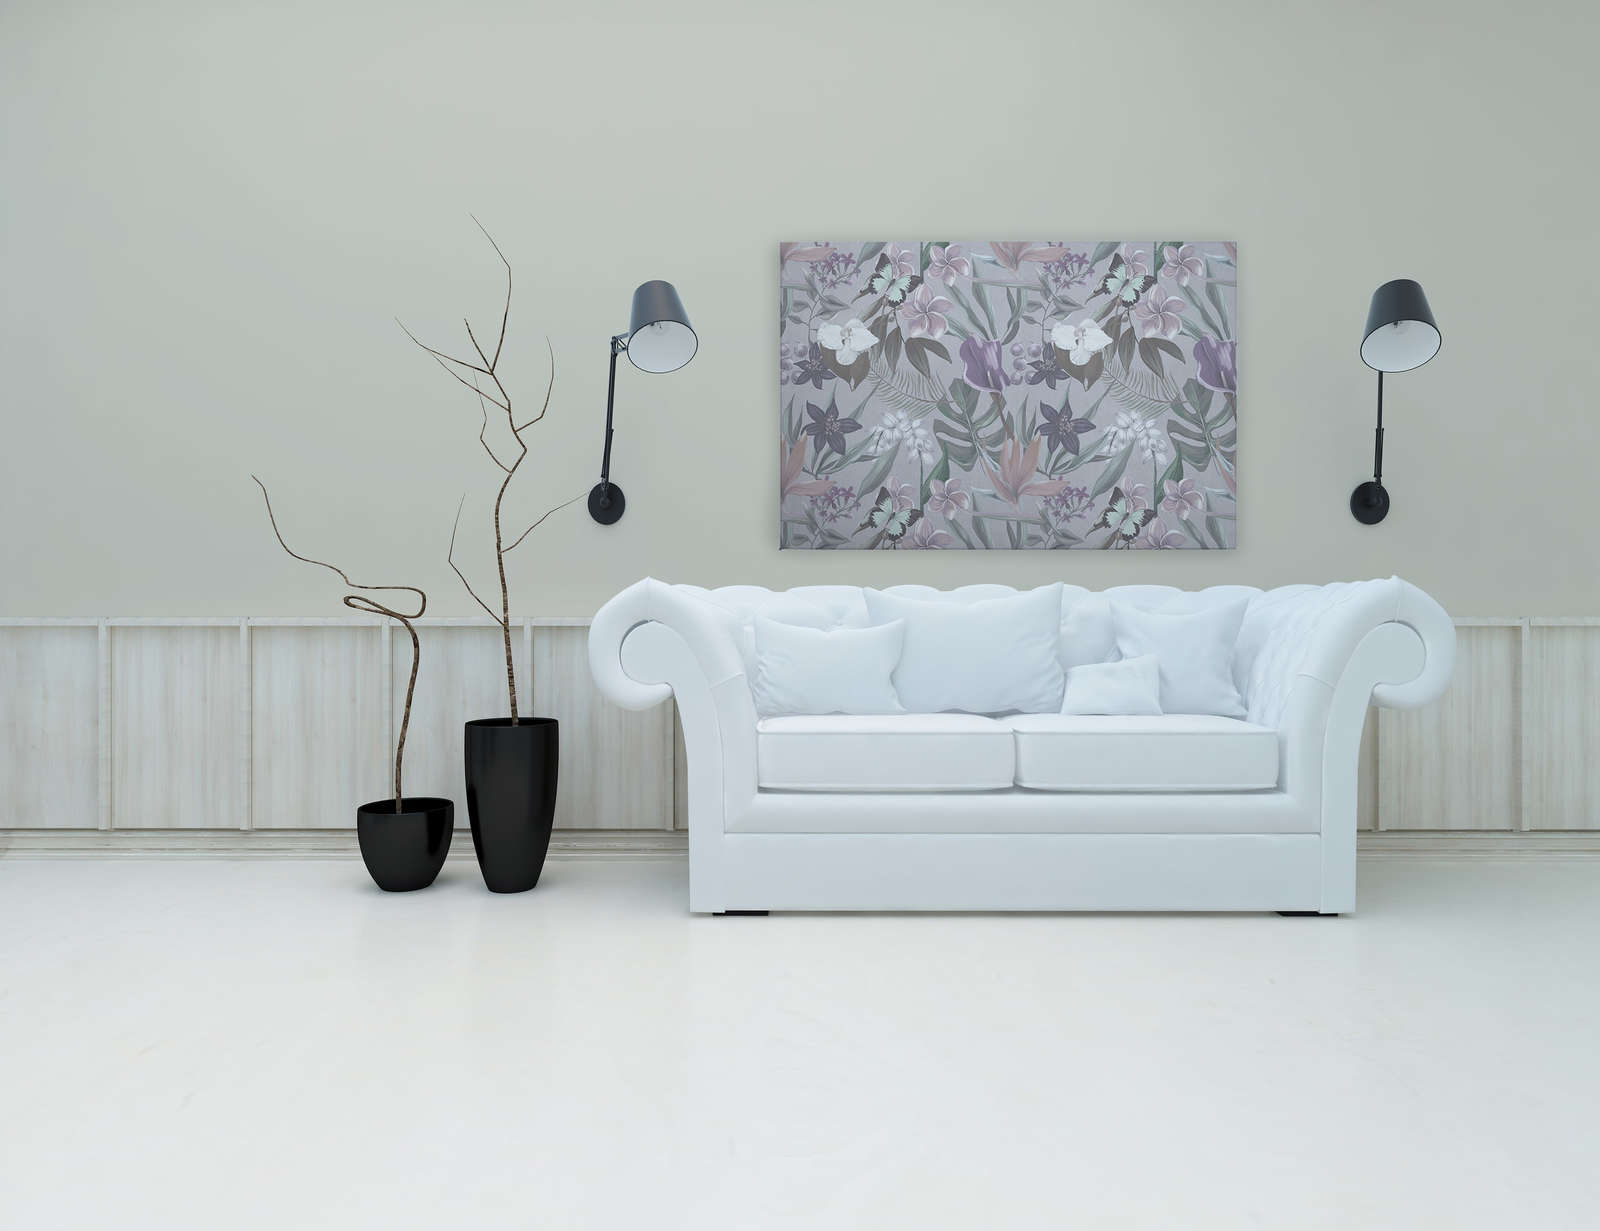             Floral Jungle Canvas Painting drawn | pink, white - 1.20 m x 0.80 m
        